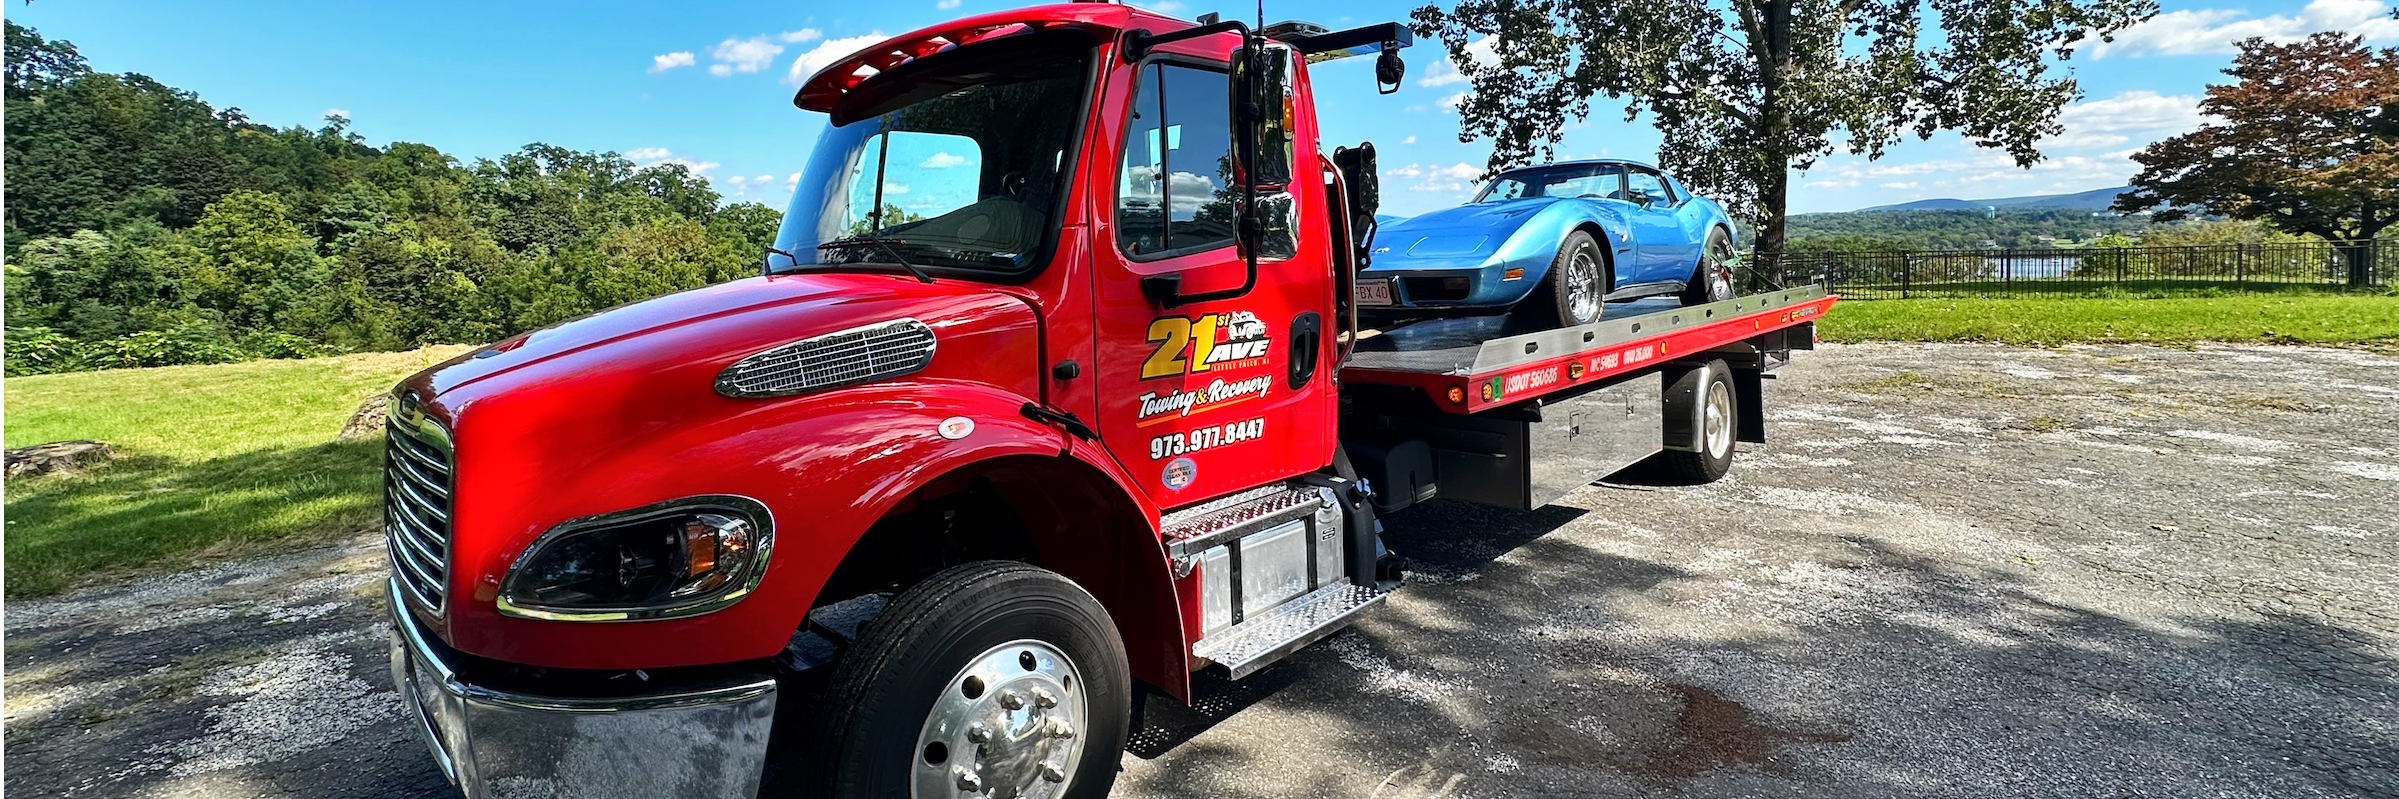 21stAve Towing & Recovery Towing.com Profile Banner